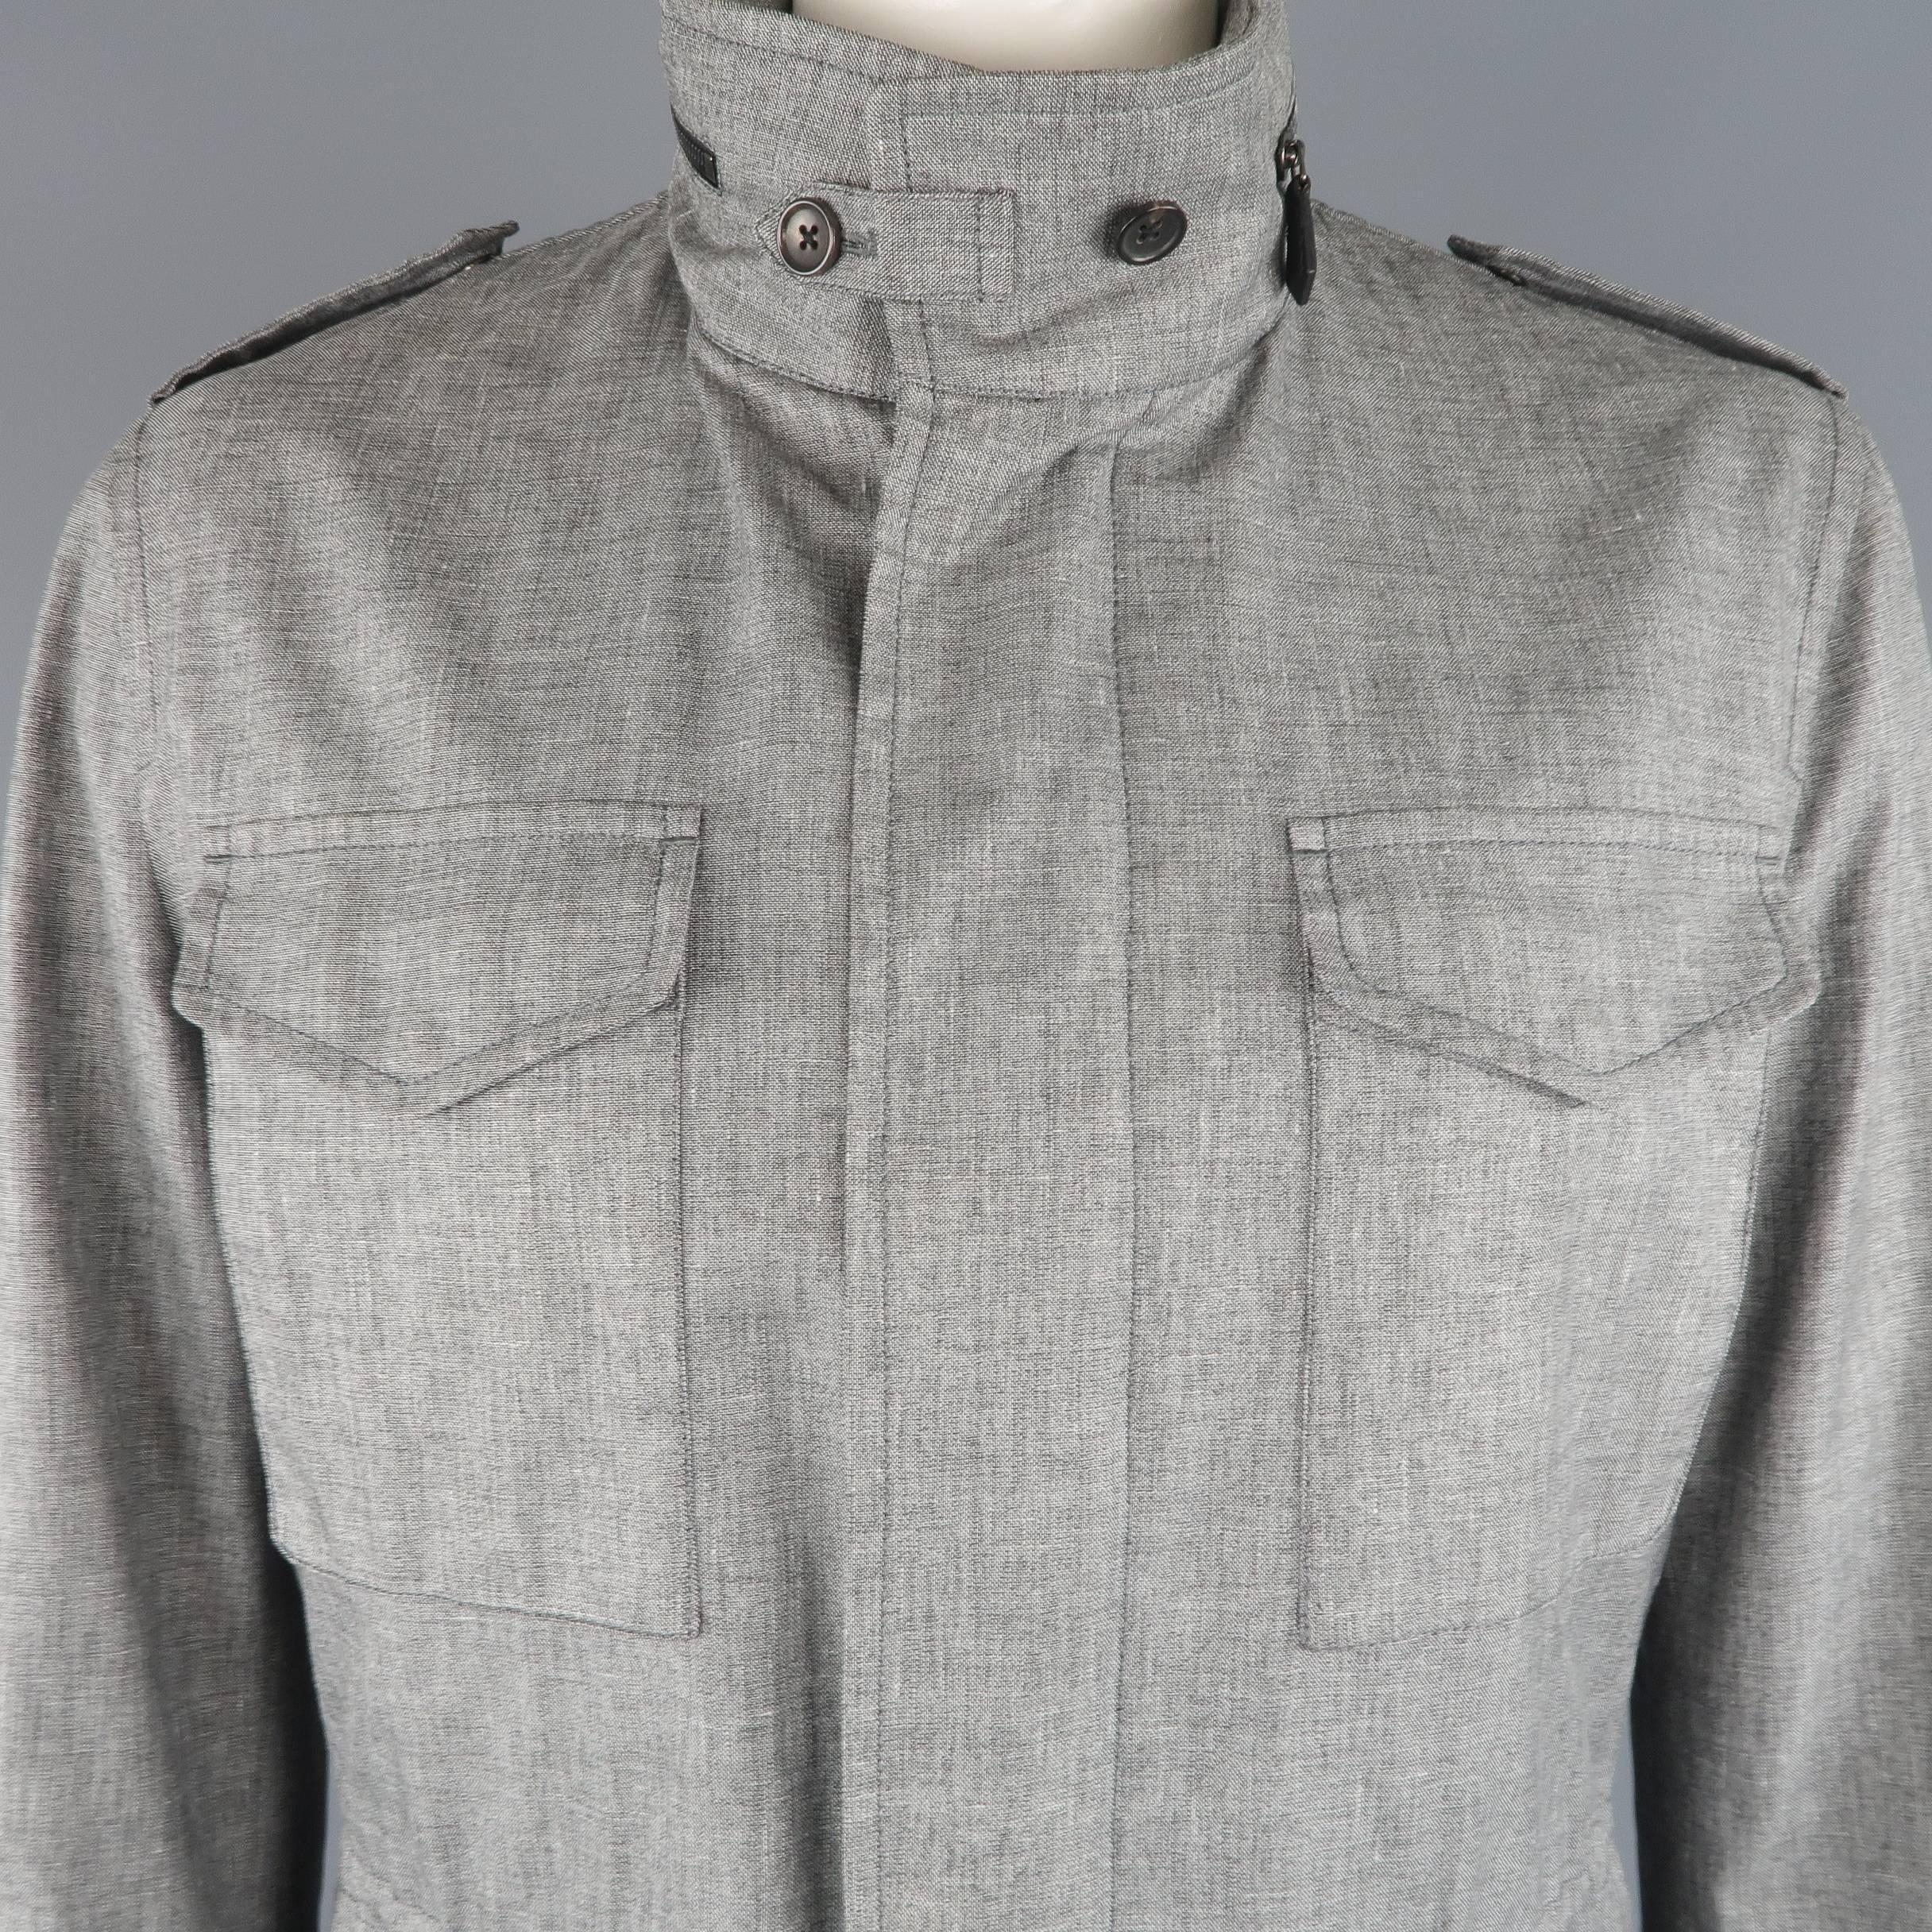 TOM FORD parka comes in linen blend light heather gray fabric with a high collar, epaulets, hidden placket zip closure, drawstring waist, zip out hood, and patch flap pockets. Minor wear. Made in Italy.
 
Good Pre-Owned Condition.
Marked: IT 56
